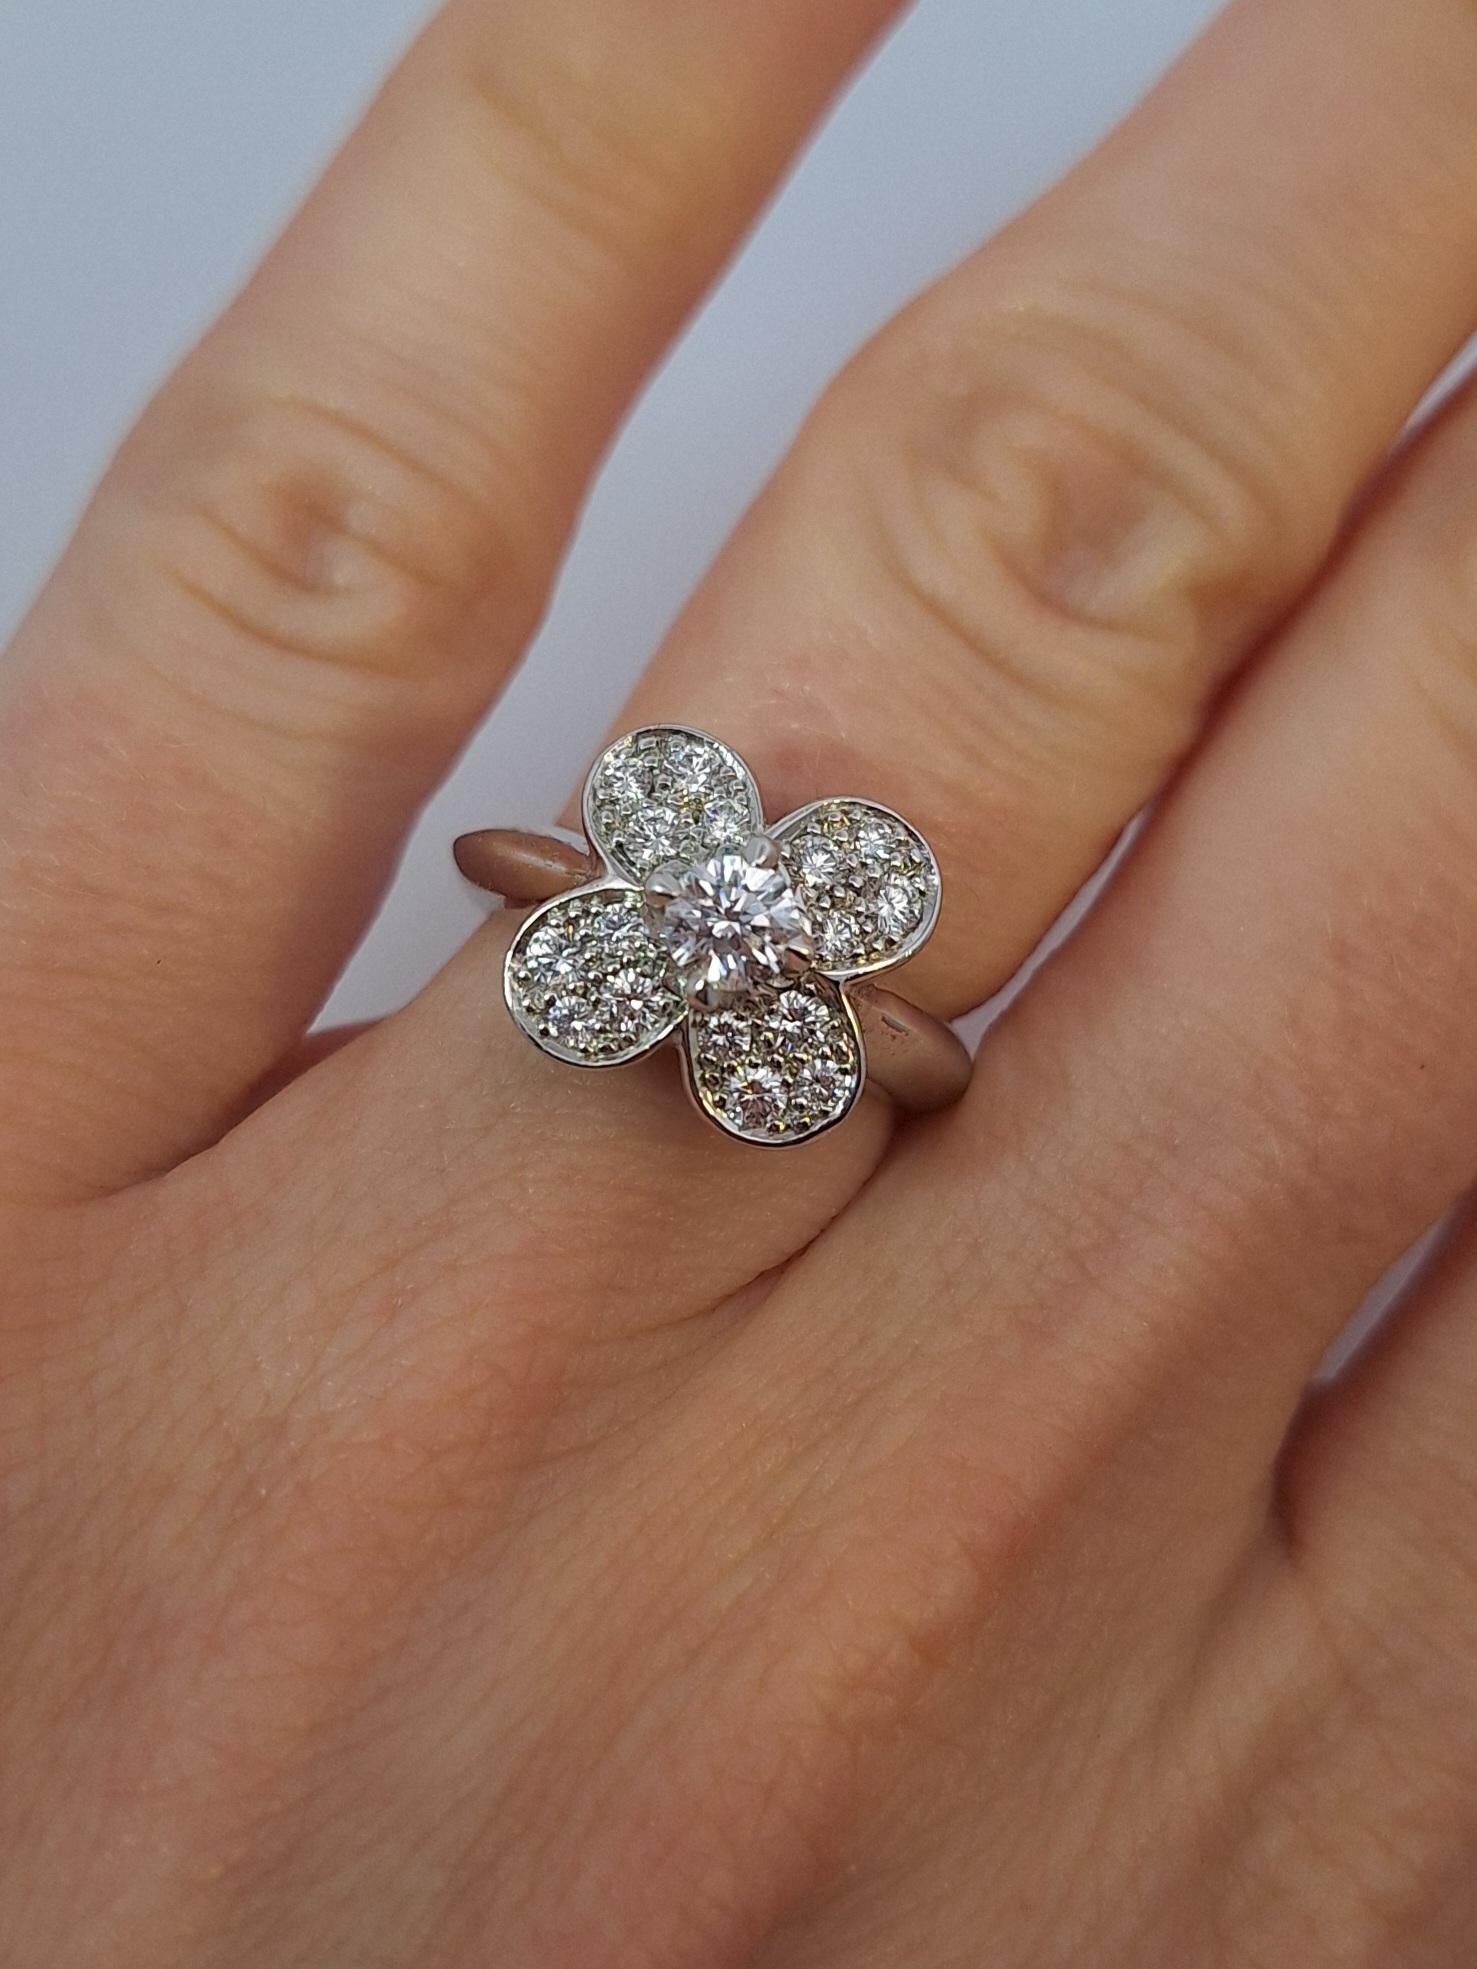 Van Cleef Trefle Diamond Ring In Excellent Condition For Sale In New York, NY